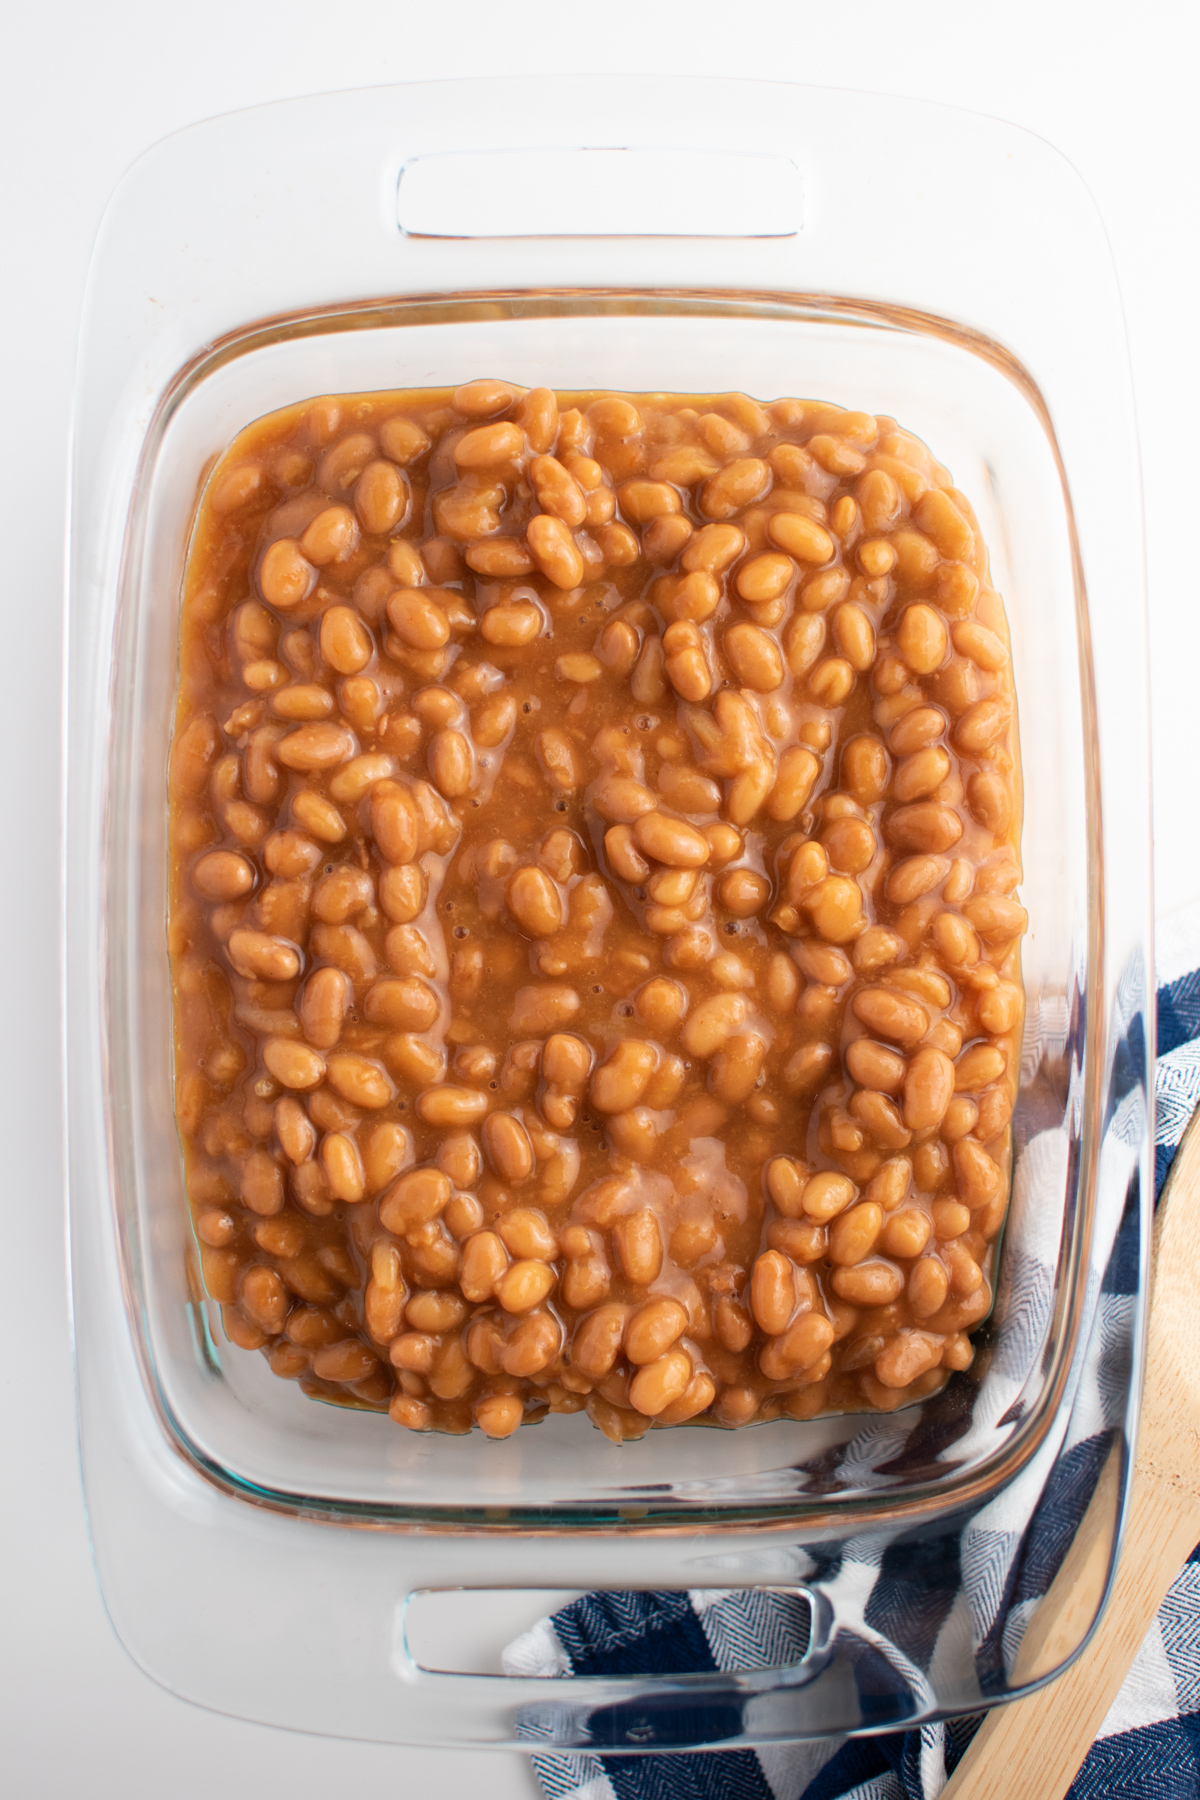 Baked beans in clear glass baking dish next to towel and wooden spoon.